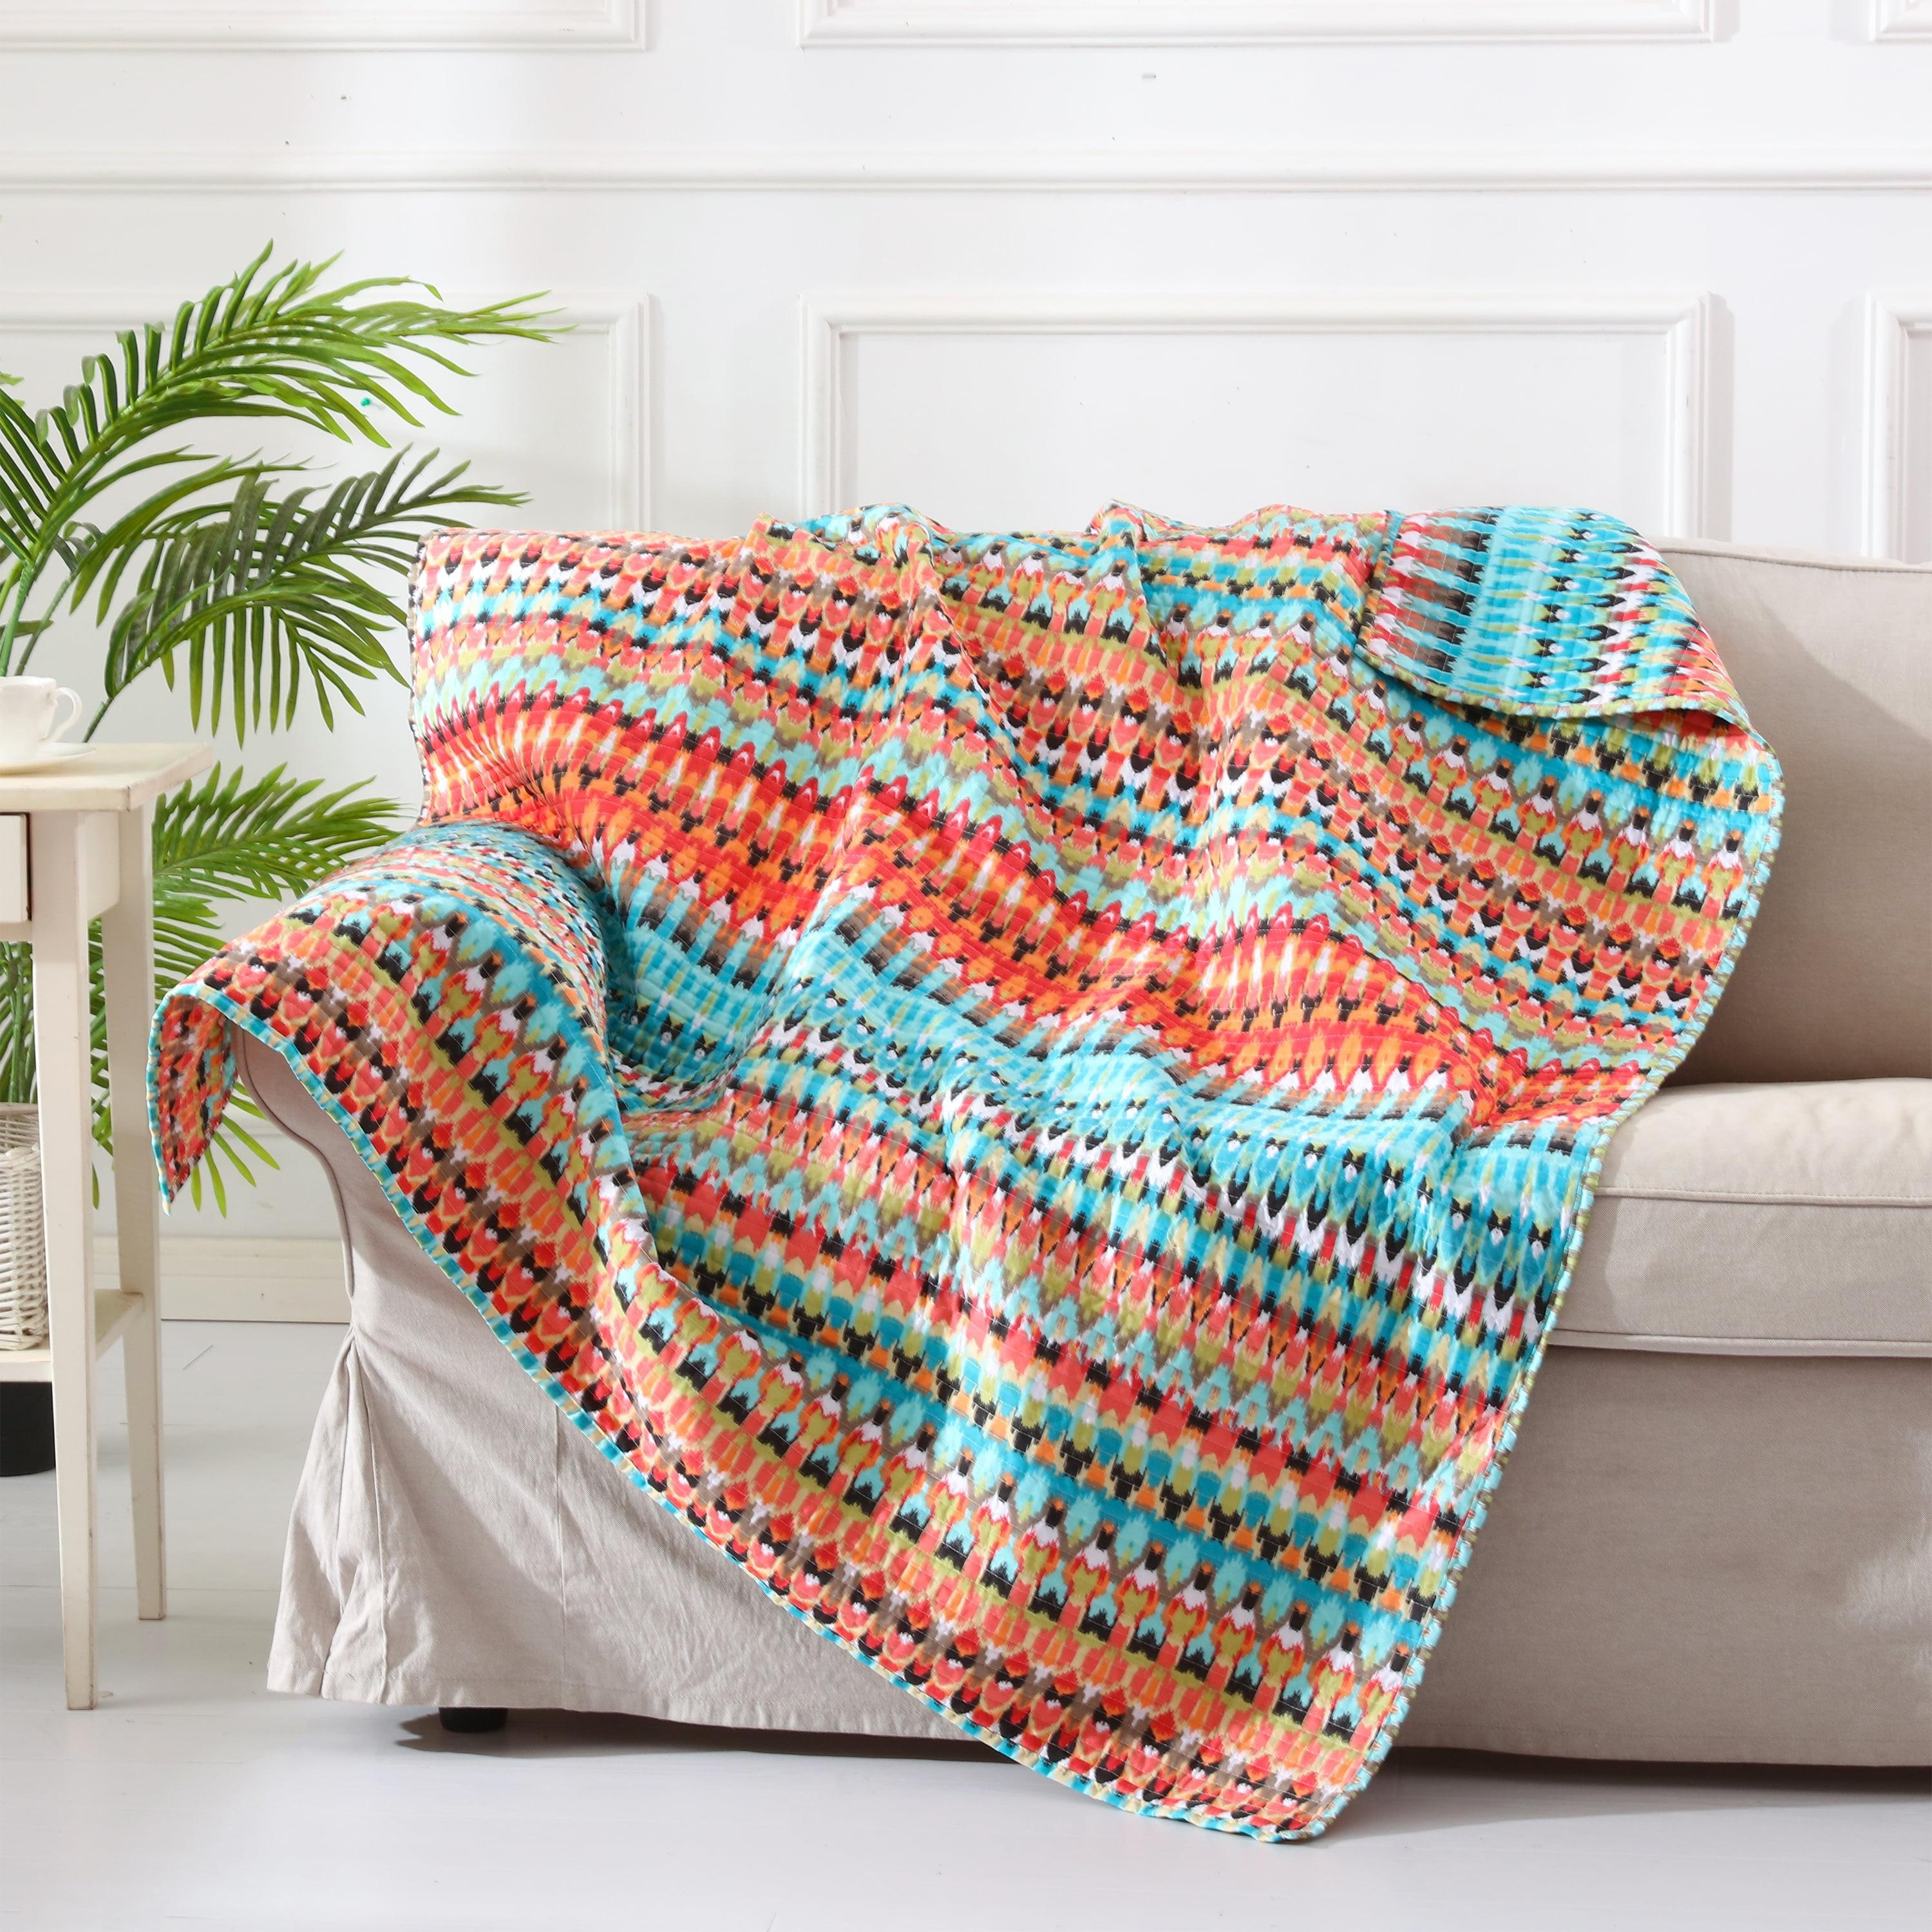 Corona Bohemian Cotton Quilted Throw - Teal, Orange, and Black